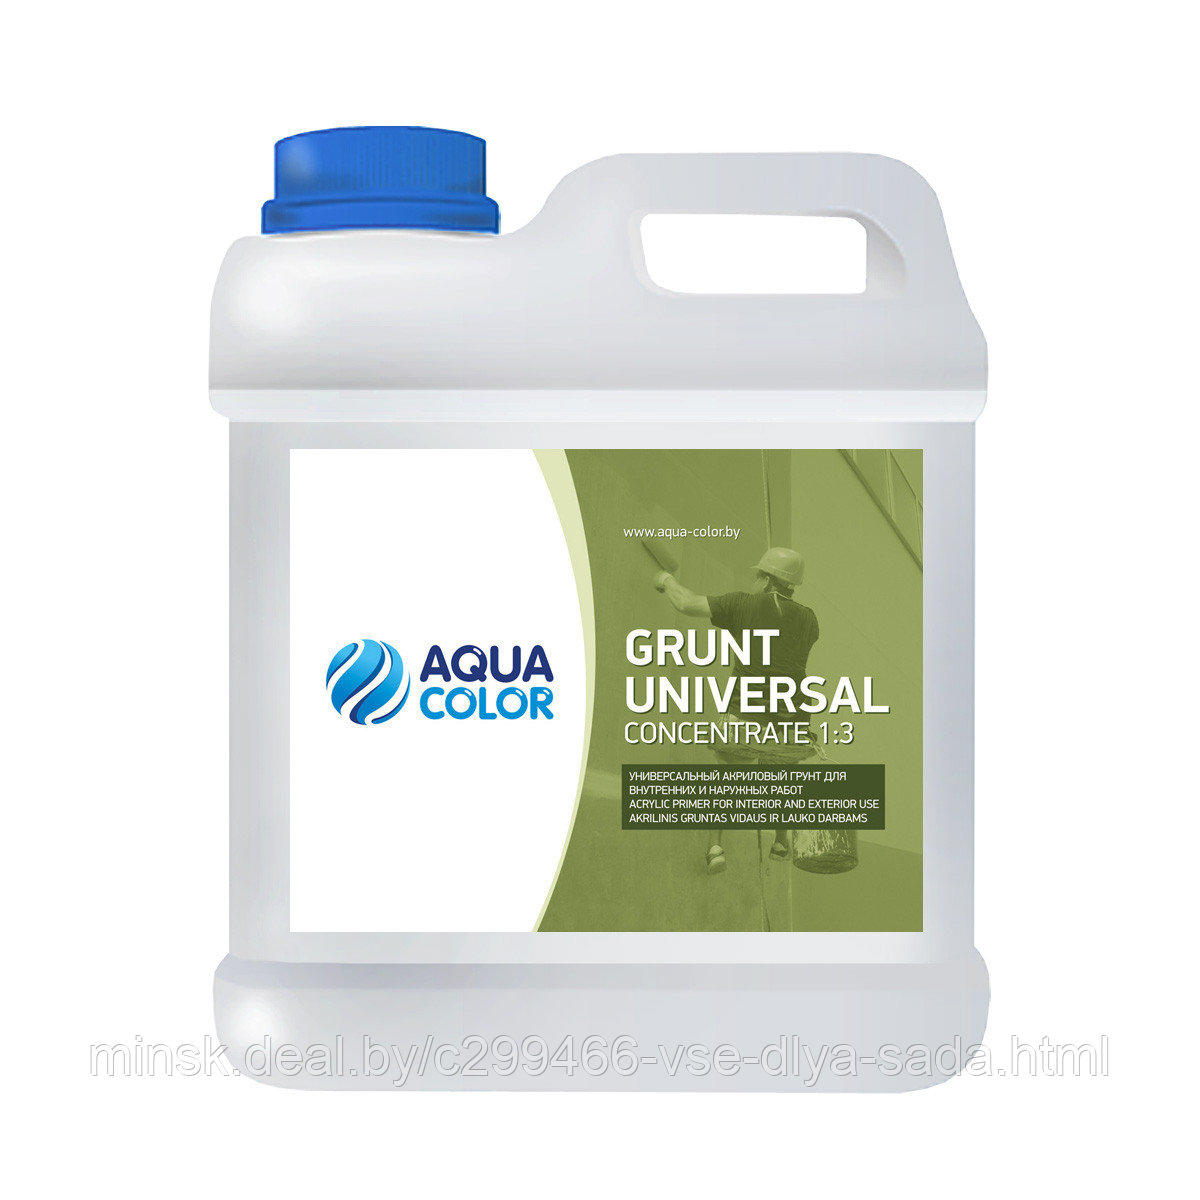 GRUNT UNIVERSAL (concentrate 1:3)